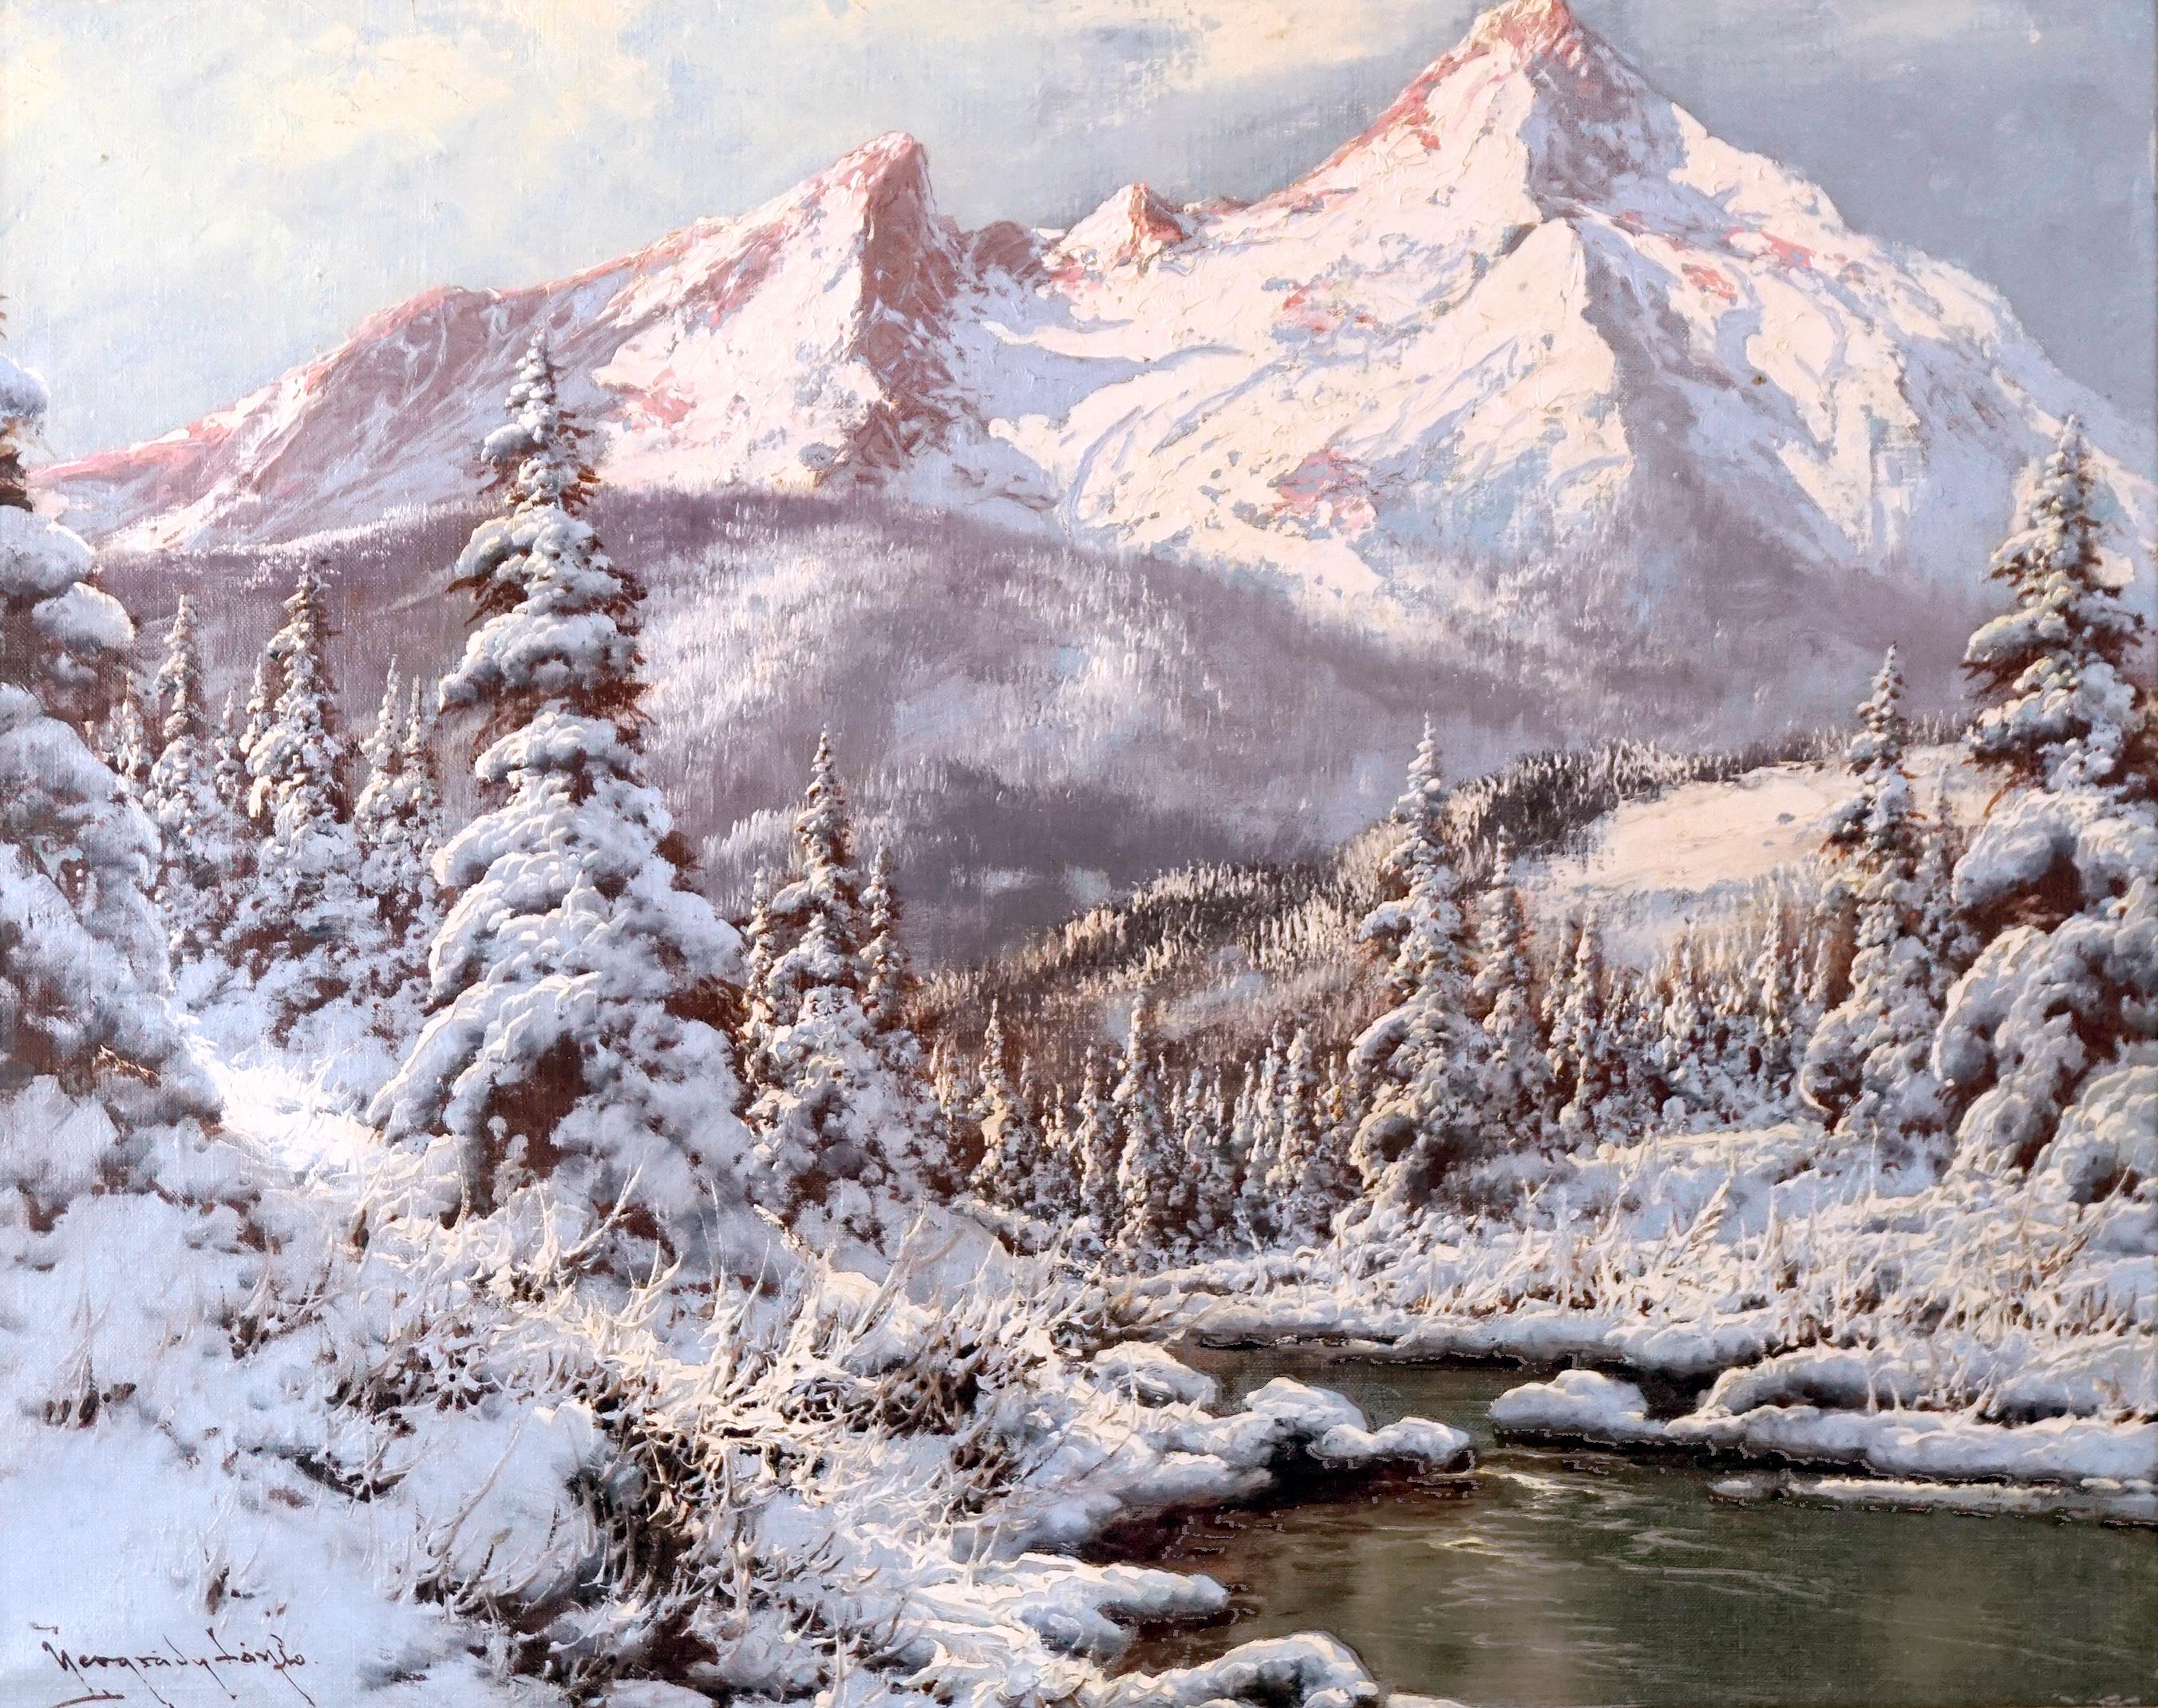 Winter's Snowy Tatra Mountains with Pines and Stream - Painting by Laszlo Neogrady